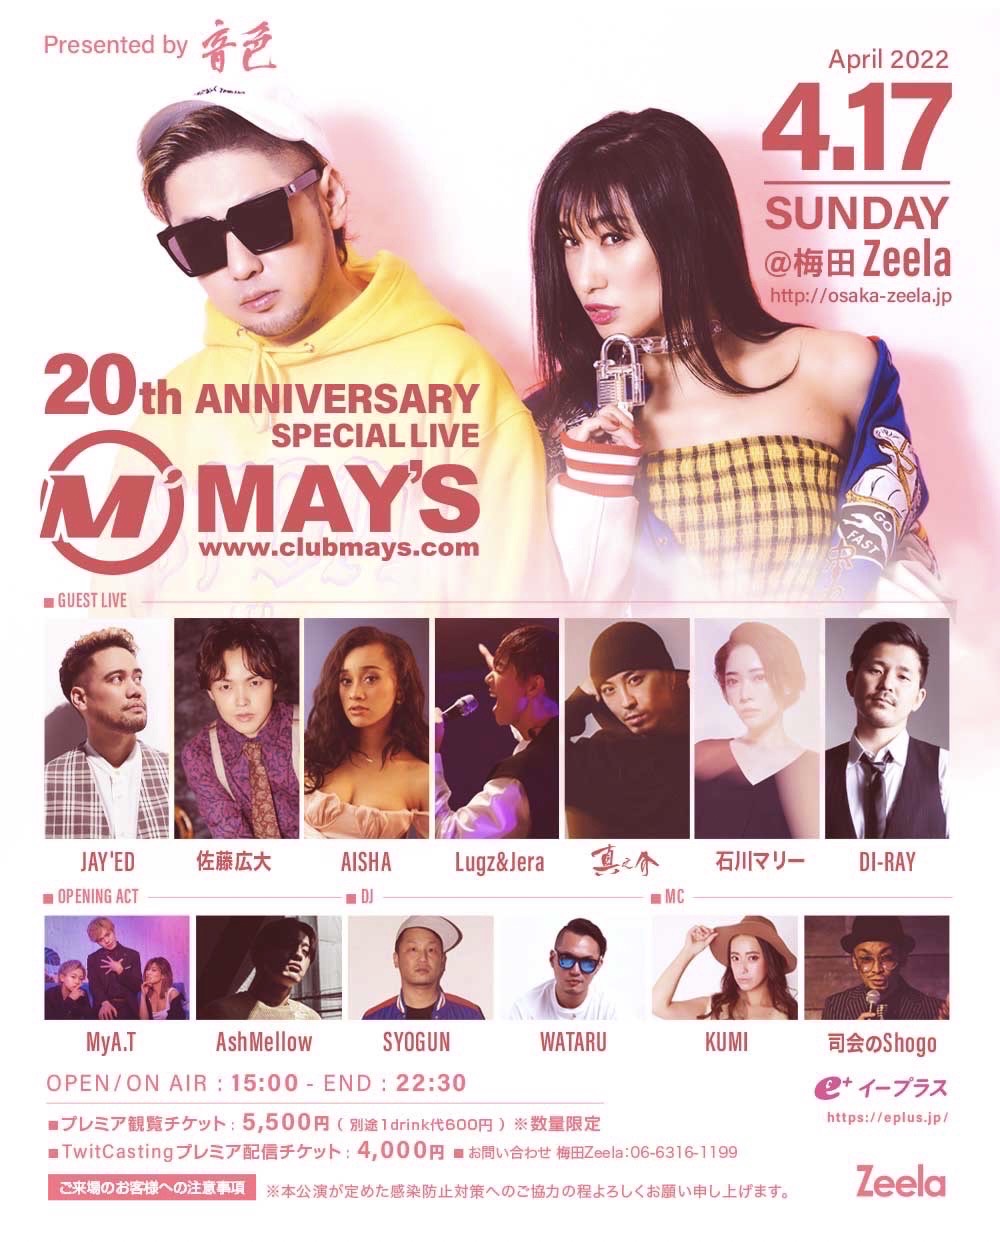 MAY'S 20TH ANNIVERSARY -PRESENTED BY 音色-